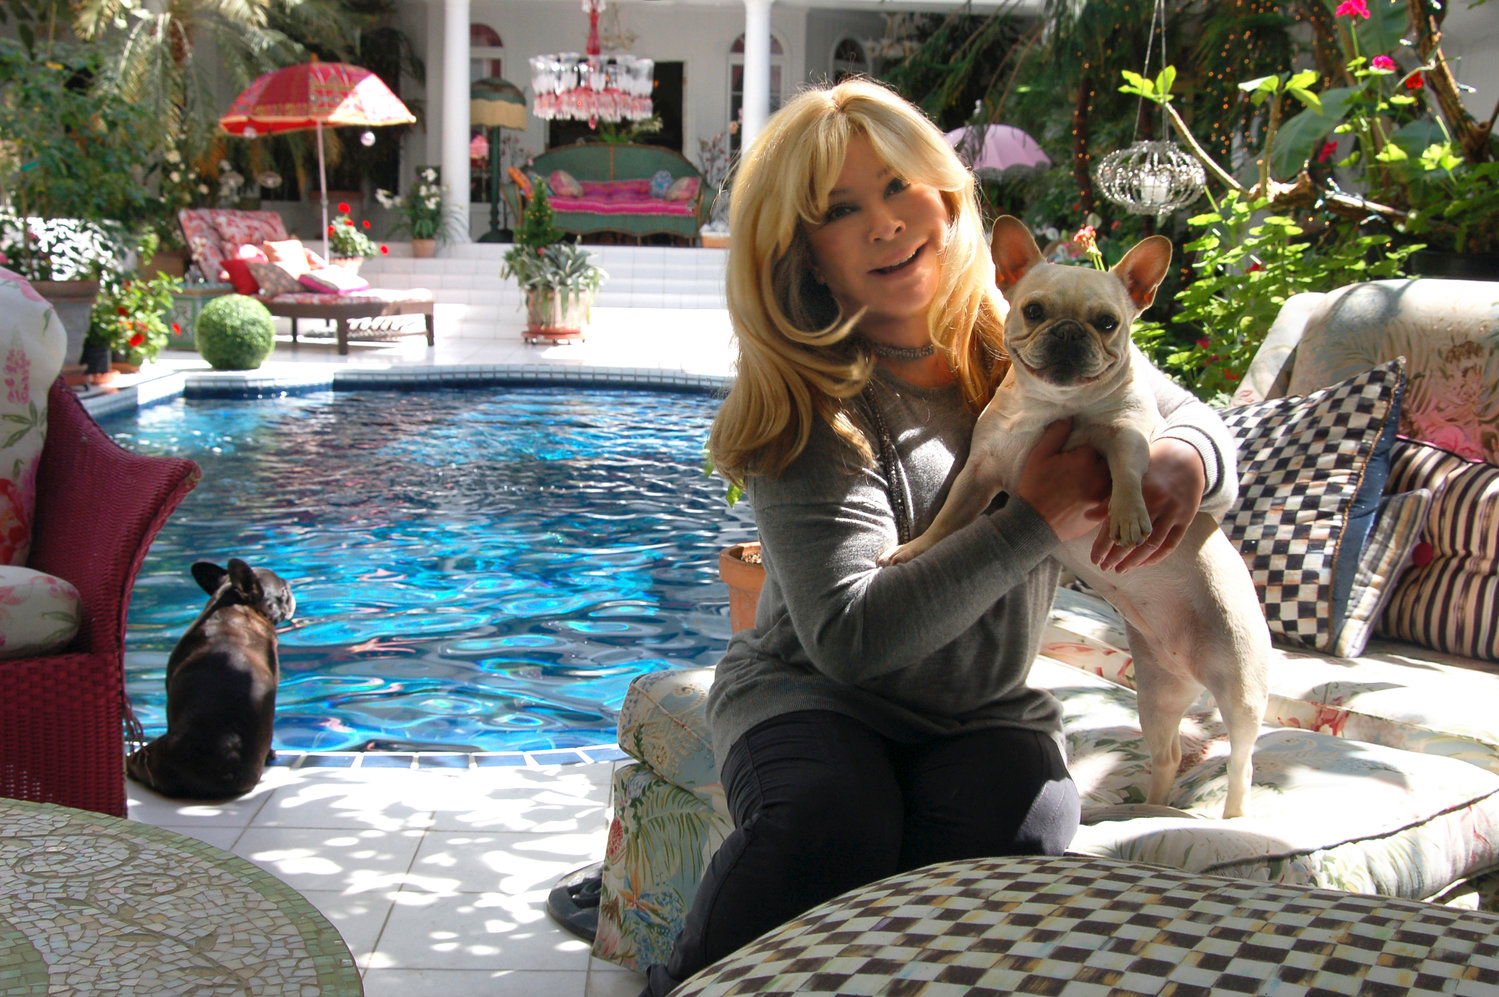 JZ Knight relaxes with her dog at her pool inside her home on the grounds of the Ramtha's School of Enlightenment. Knight, who says she channels the 35,000-year-old Ramtha, is turning over day-to-day operations of her business JZK Inc. to a board of directors.